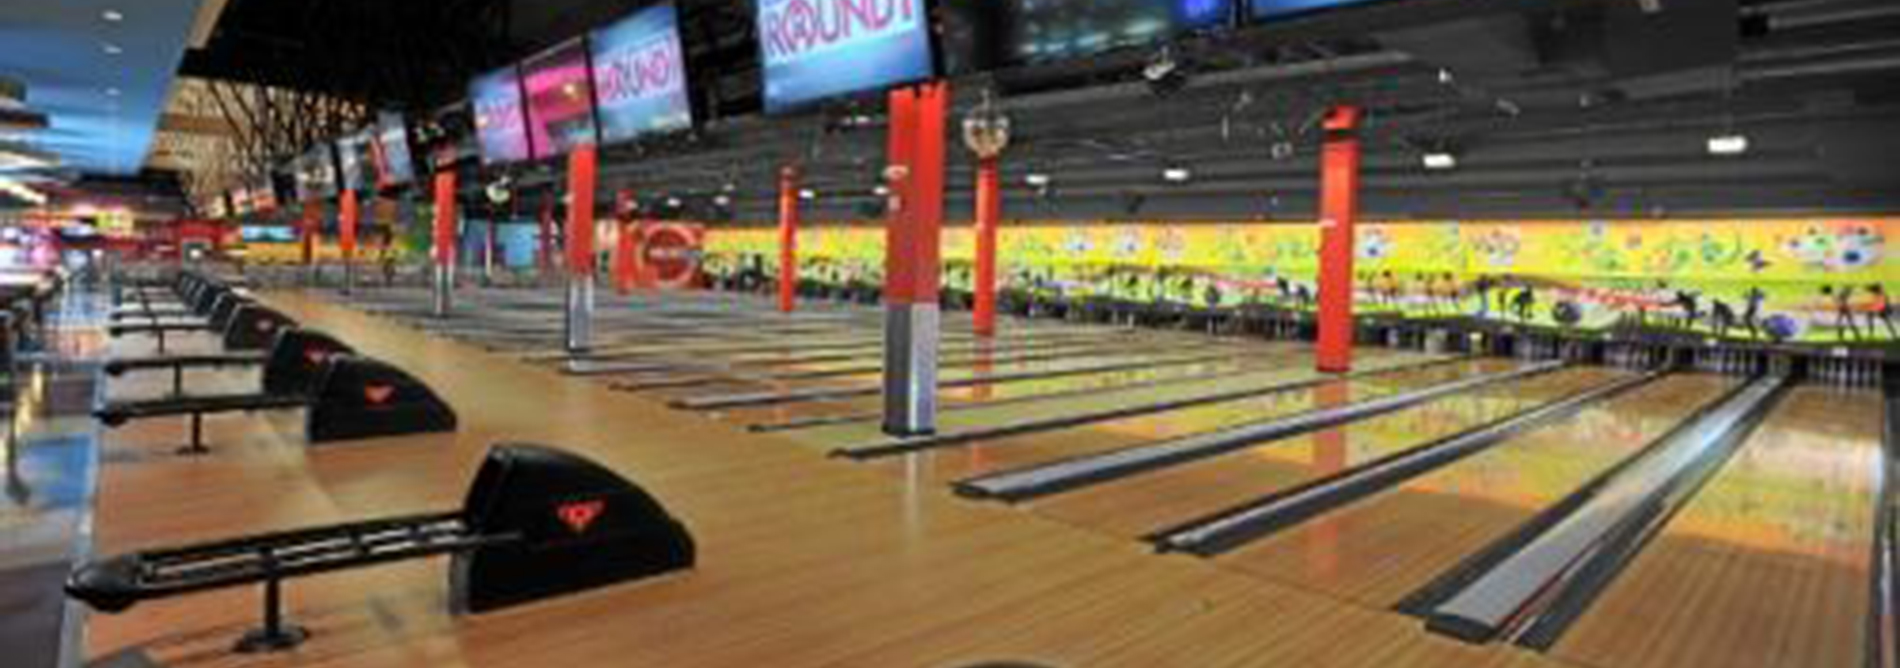 QUBICAAMF-bowling-Family-Entertainment-Center-Round-1-Lakewood-banner.jpg